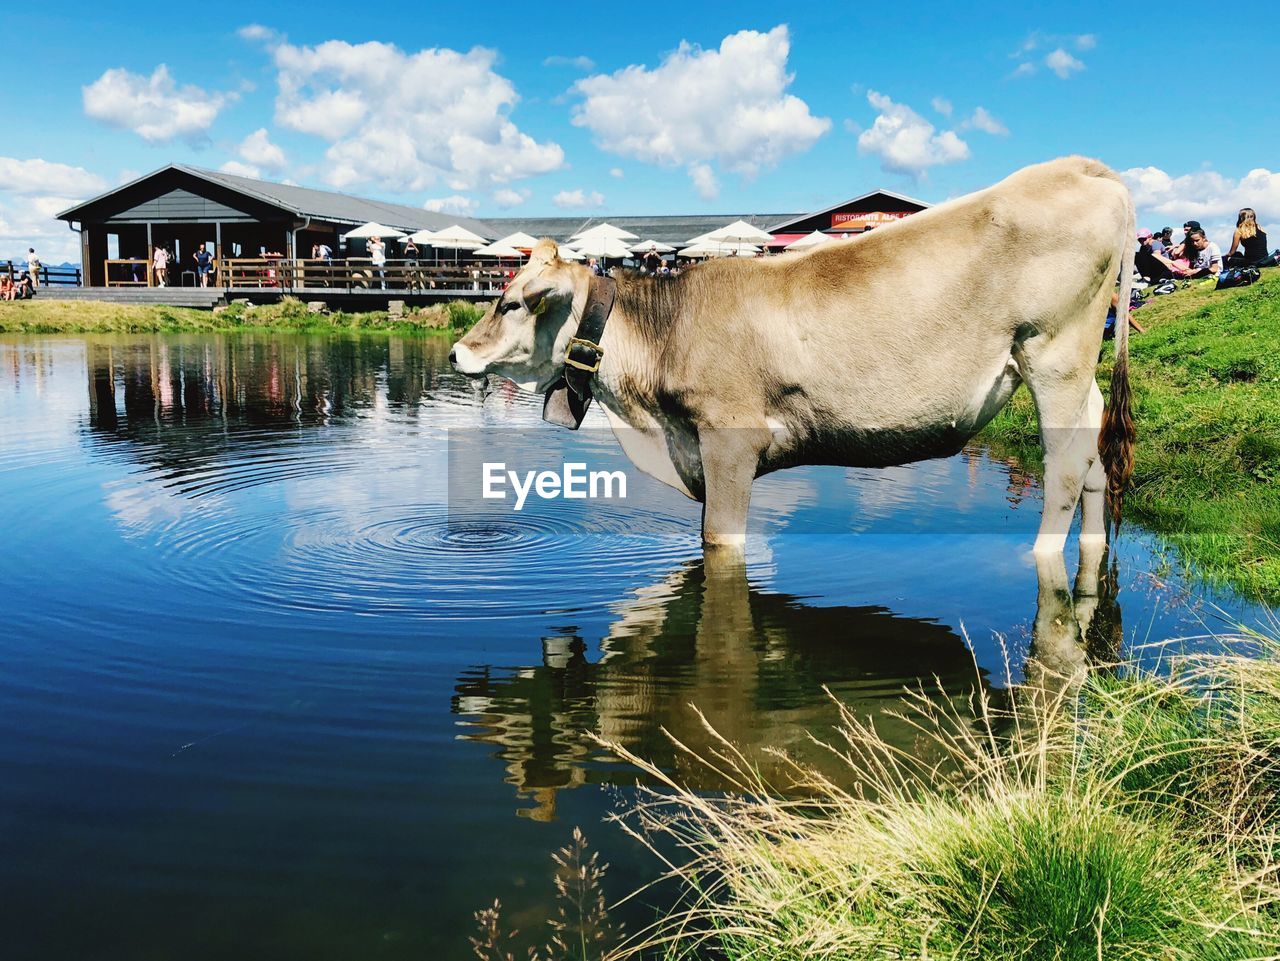 COWS STANDING IN WATER